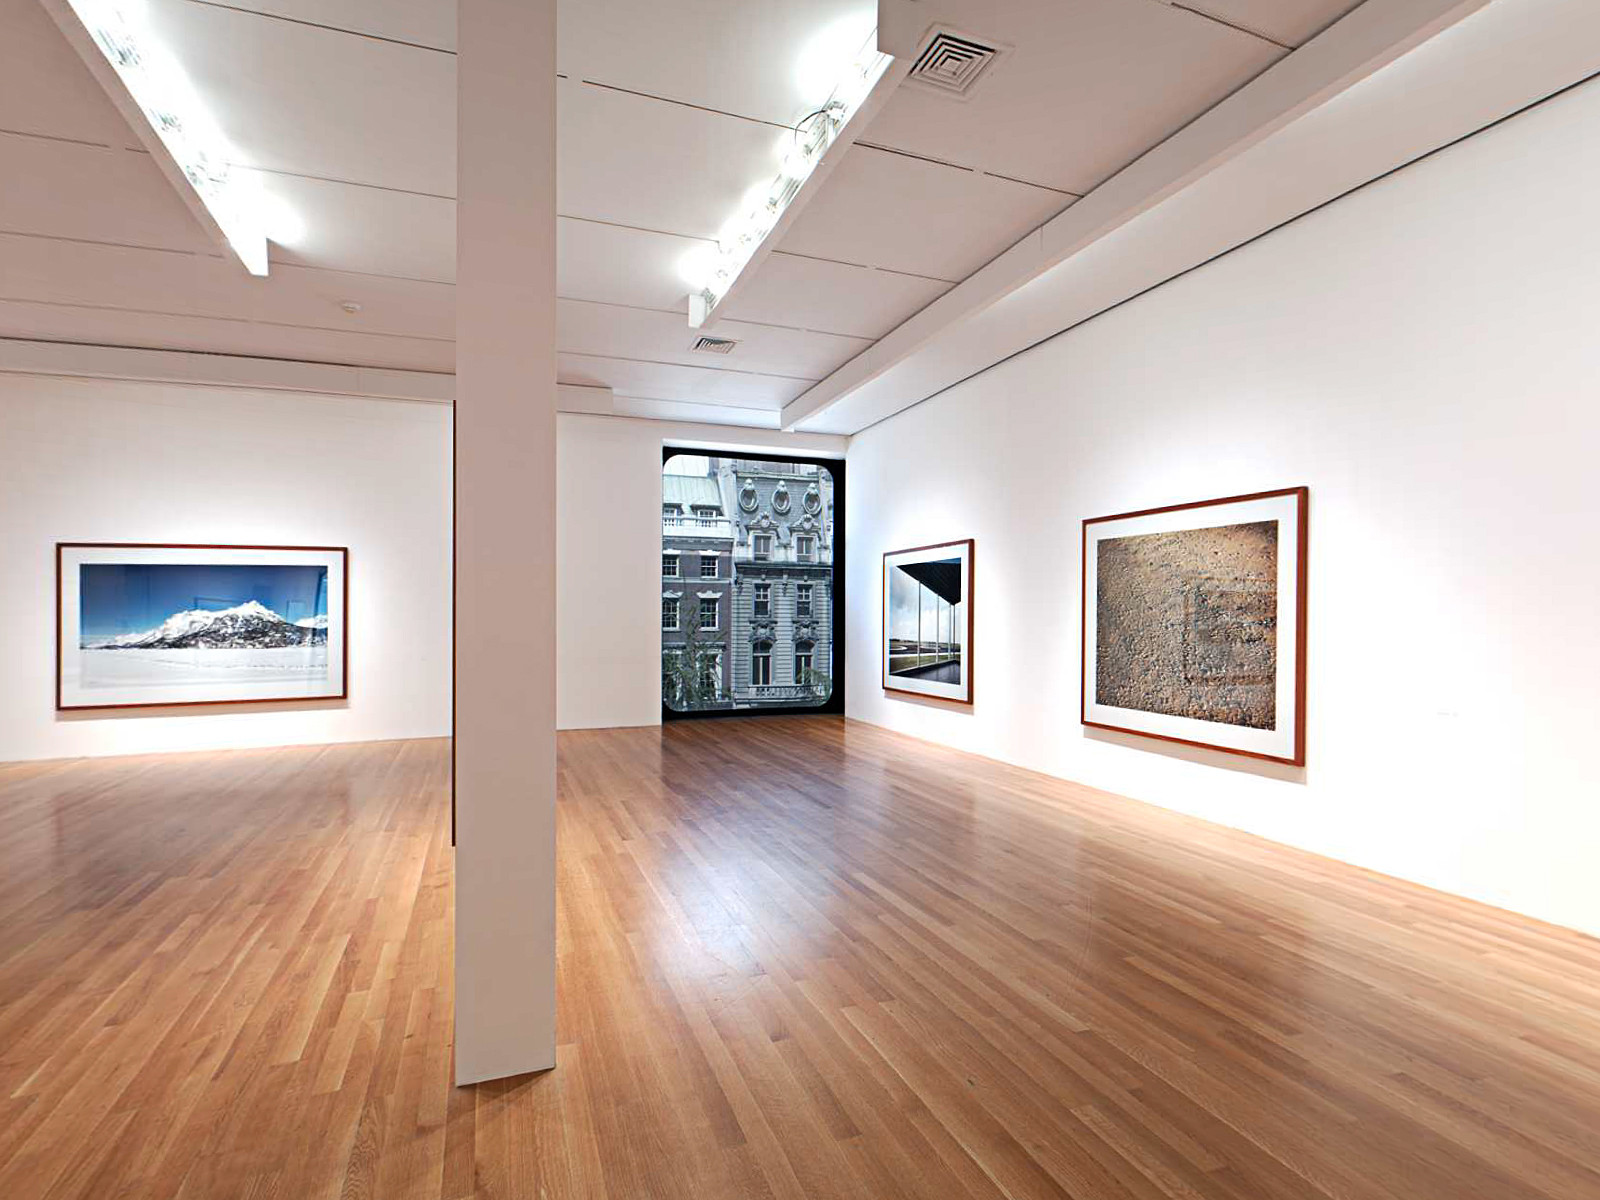 Installation view of the exhibition "Andreas Gursky" MoMA